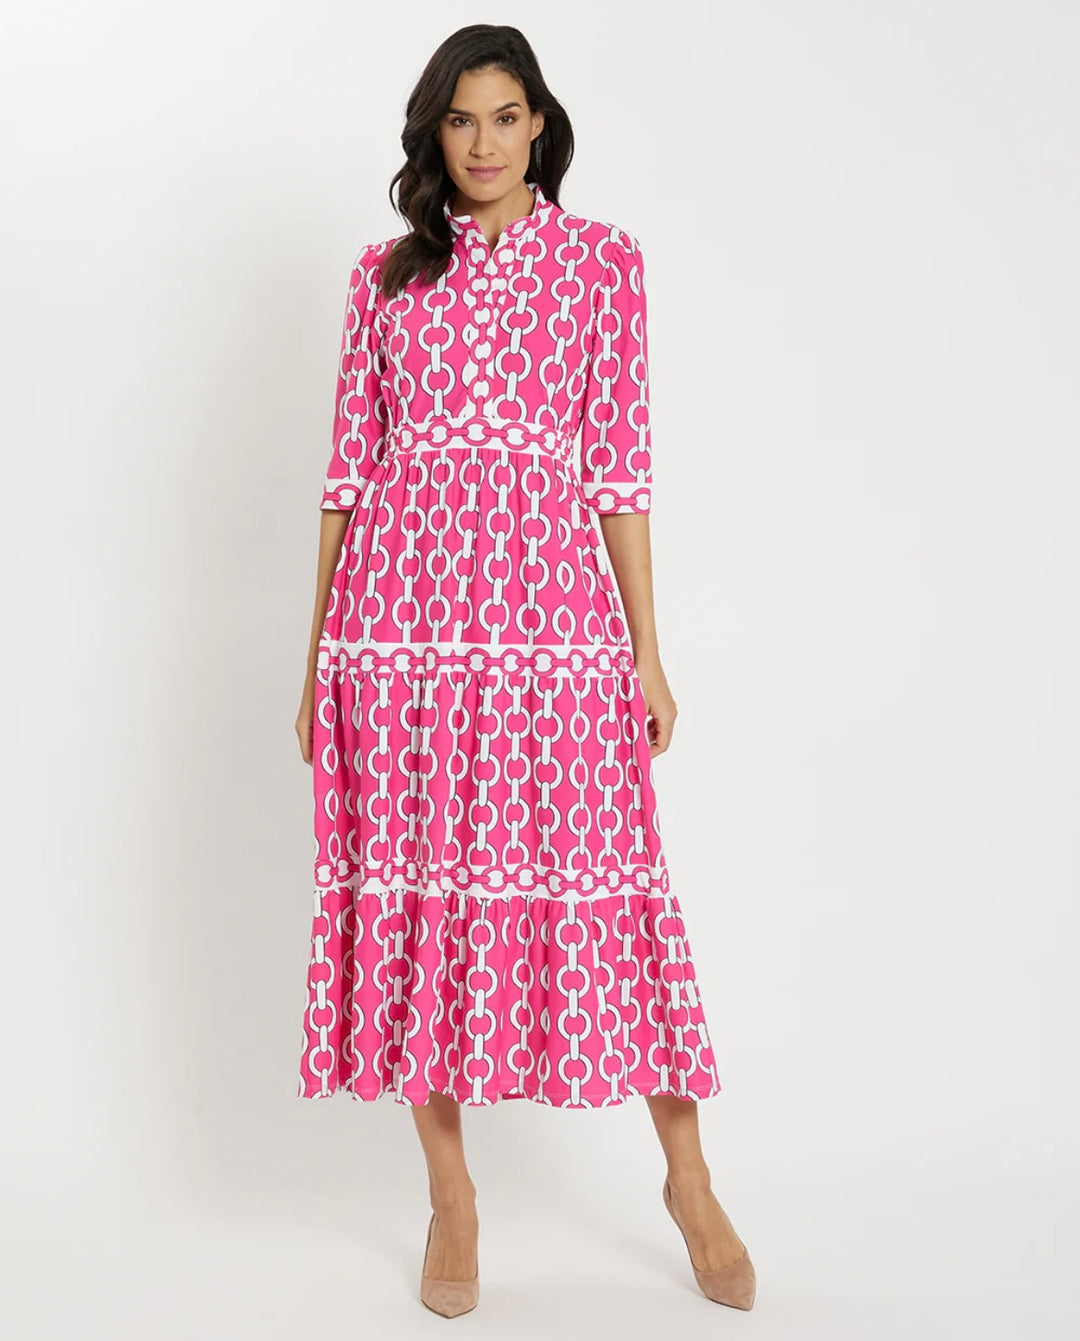 Jude Connally Candy Dress | Grand Chains Watermelon